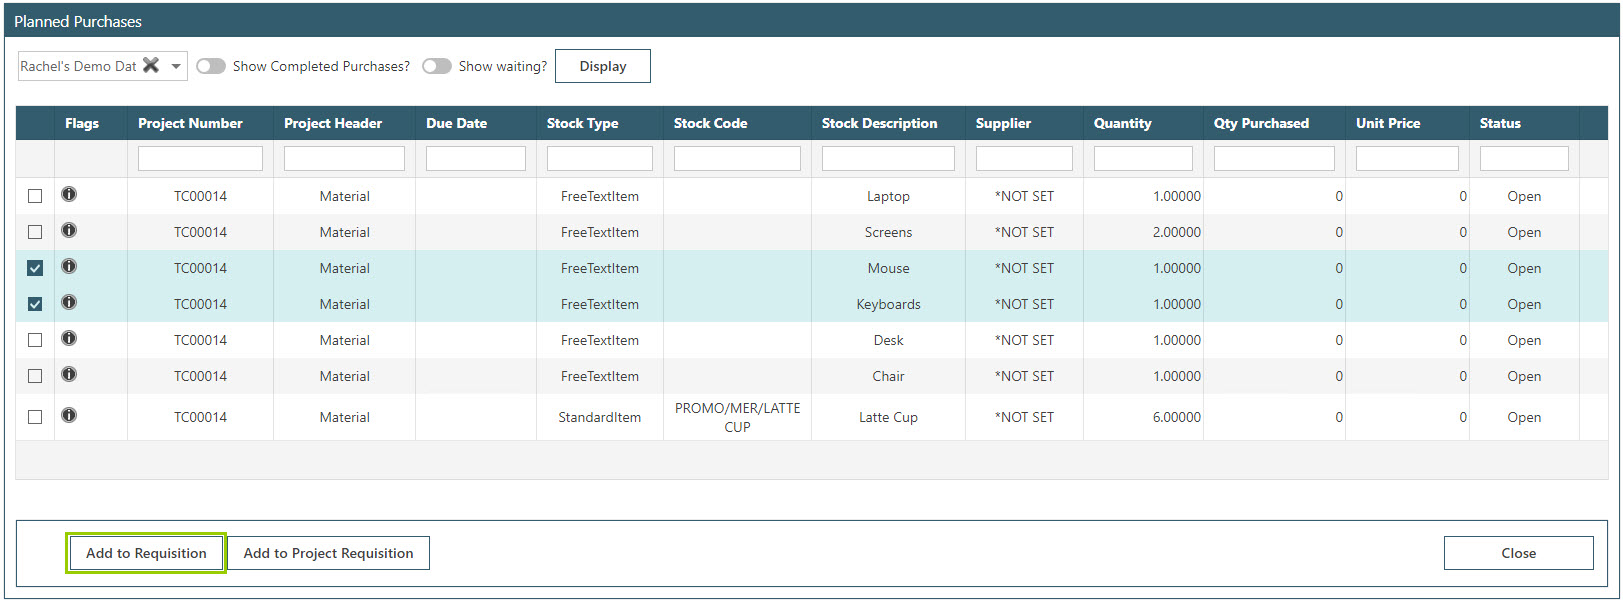 Sicon WAP Purchase Requisitions Help and User Guide - Requisition HUG Section 24.3 Image 5